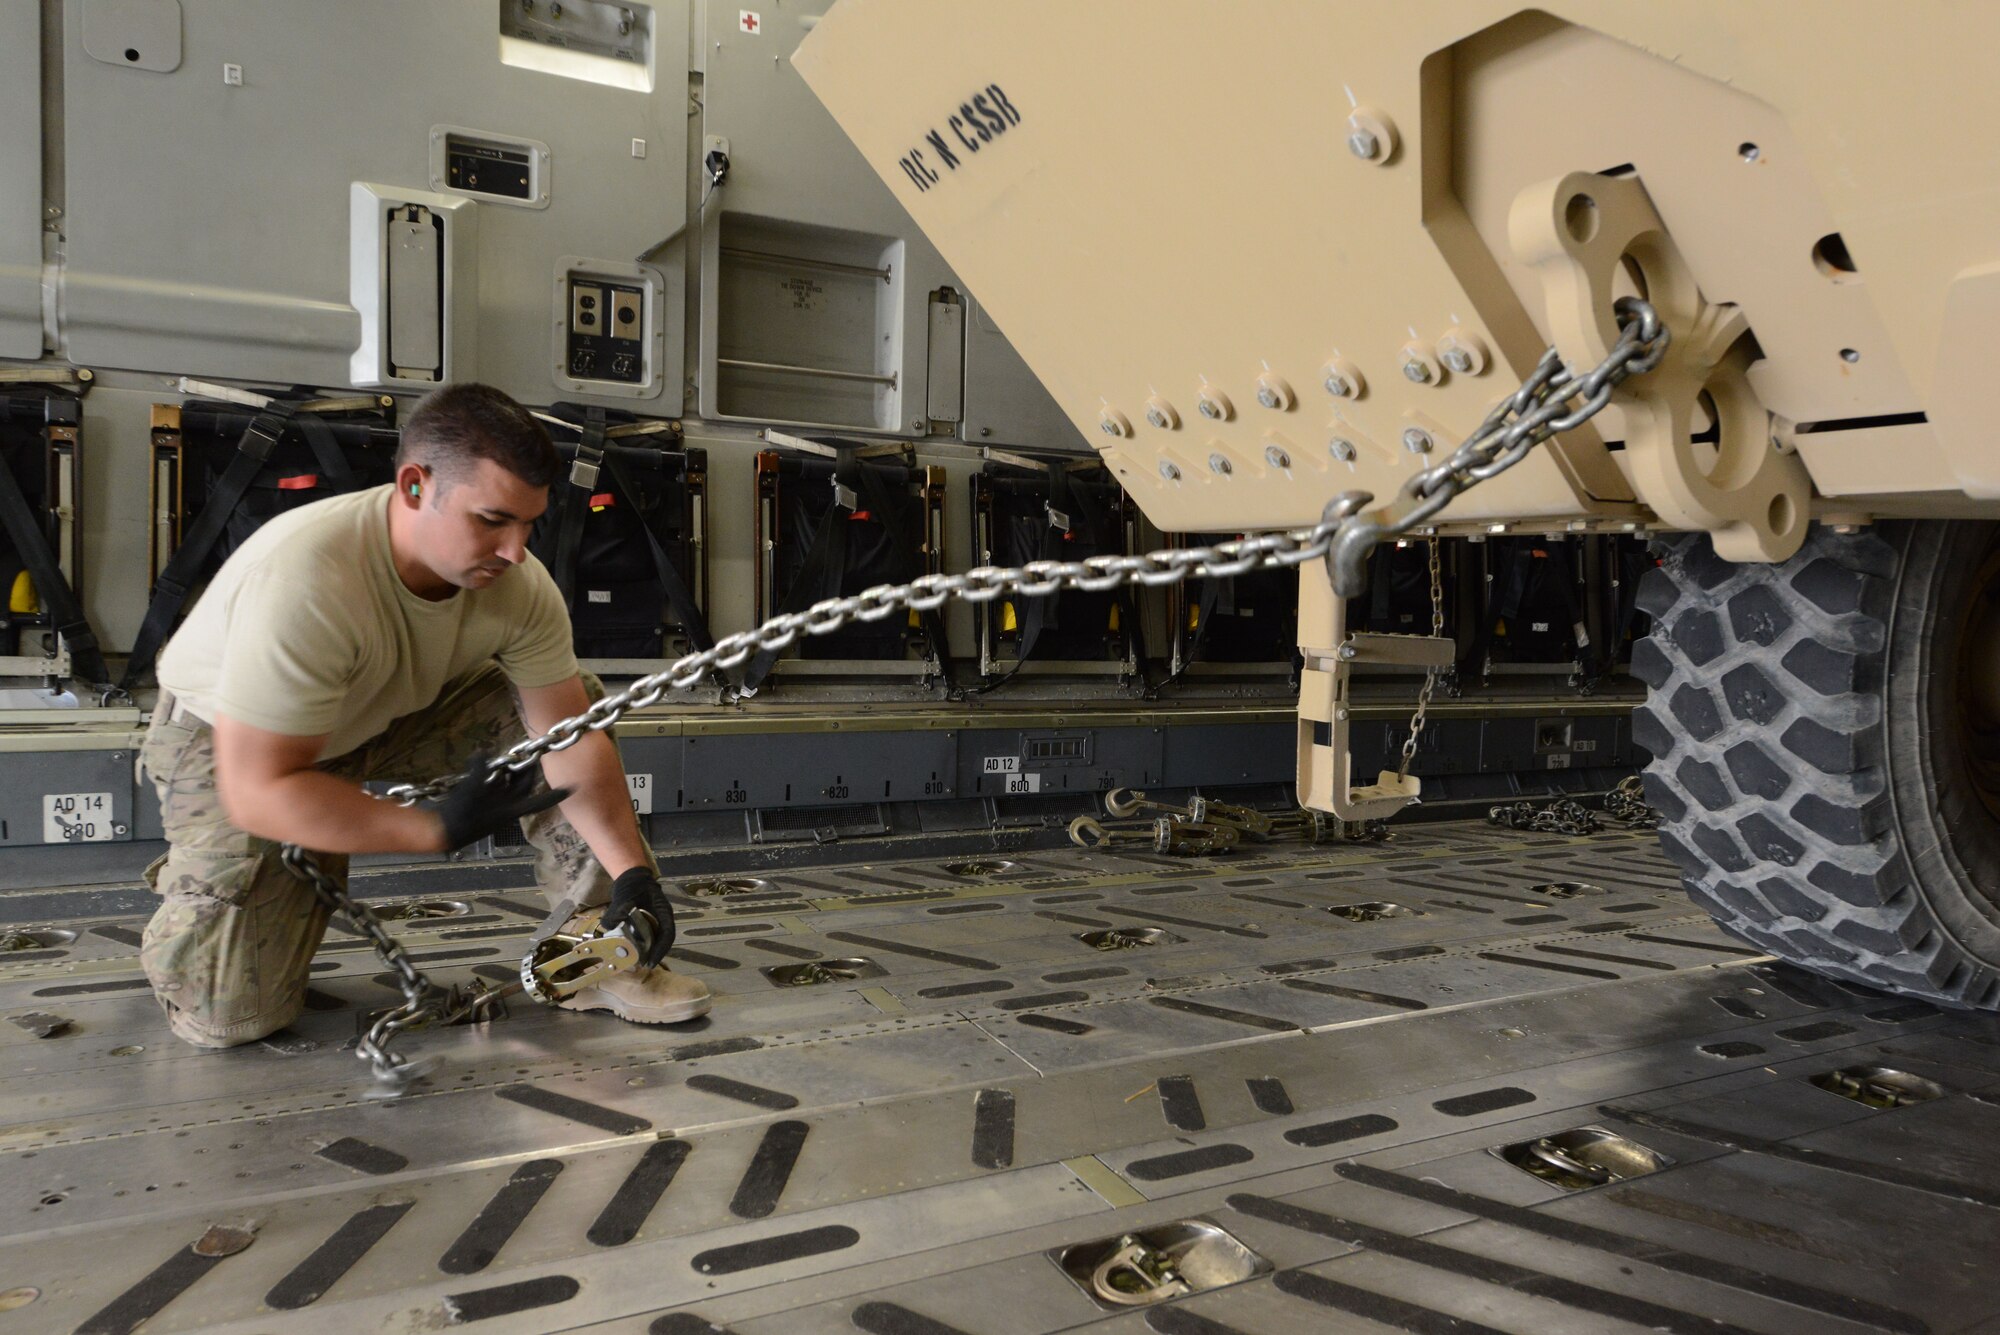 U.S. Air Force Staff Sgt. Reuben Montes, an air transportation journeyman assigned to the 455th Expeditionary Aerial Port Squadron Detachment 1, uses chains to lock a Heavy Expanded Mobility Tactical Truck into place aboard a C-17 Globemaster III while at Mazar-e Sharif, Afghanistan June 24, 2014. As part of the retrograde mission, EAPS Det 1 is responsible for inspecting and loading cargo and vehicles leaving Mazar-e Sharif. Montes, a native of Worthington, Ohio, is deployed from the 375th Logistics Readiness Squadron, Scott Air Force Base, Ill. (U.S. Air Force photo by Master Sgt. Cohen A. Young/Released)  